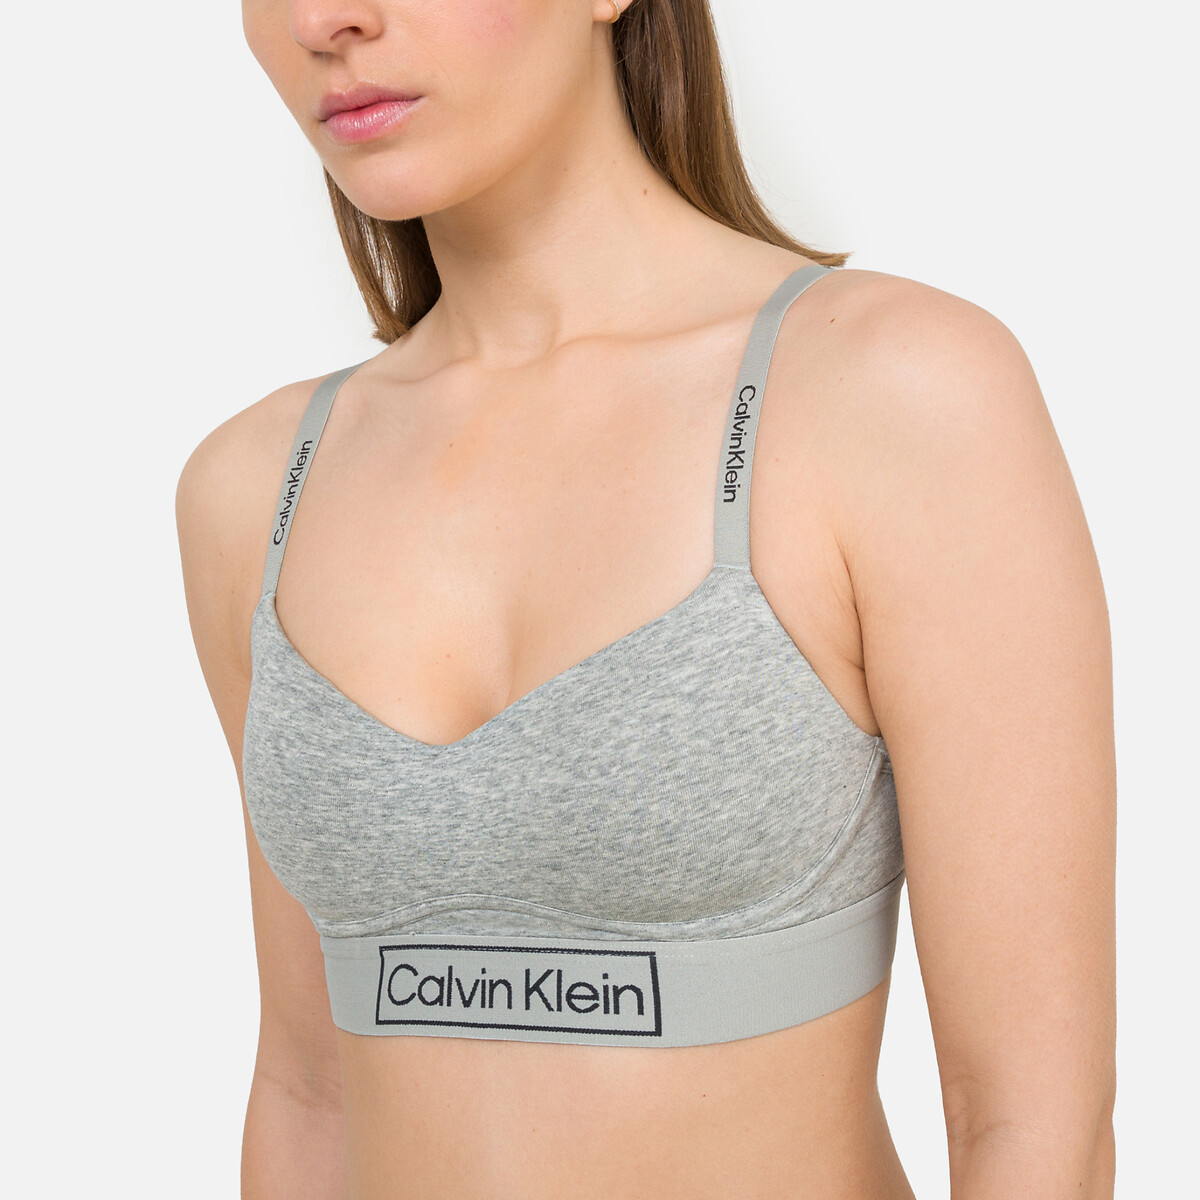 Birdy cotton-blend knit bralette in blue - Rotate